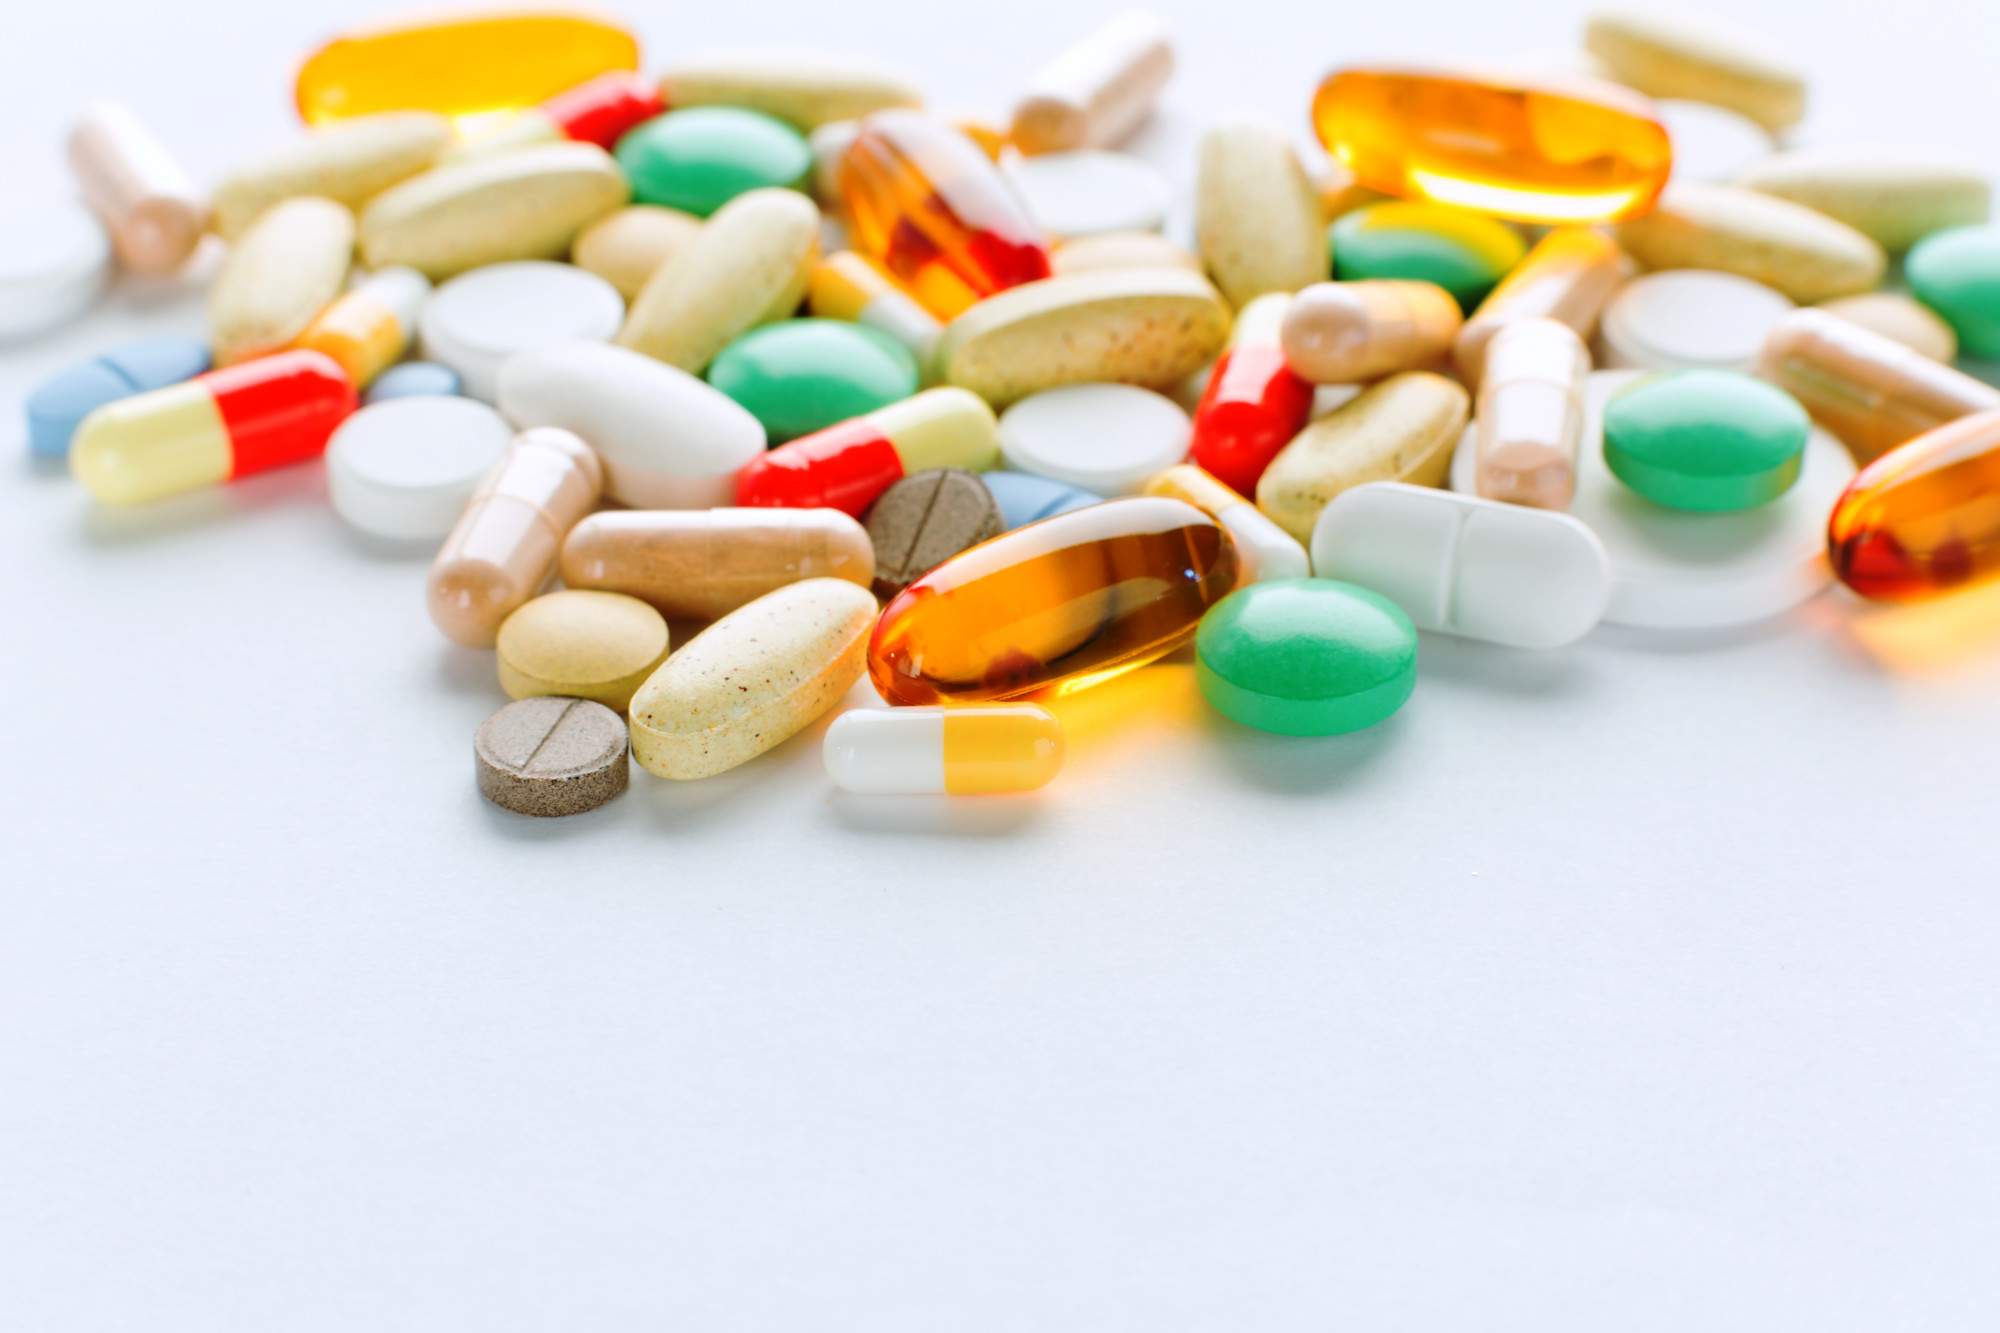 5 Health Supplement Purchasing Errors and How to Avoid Them